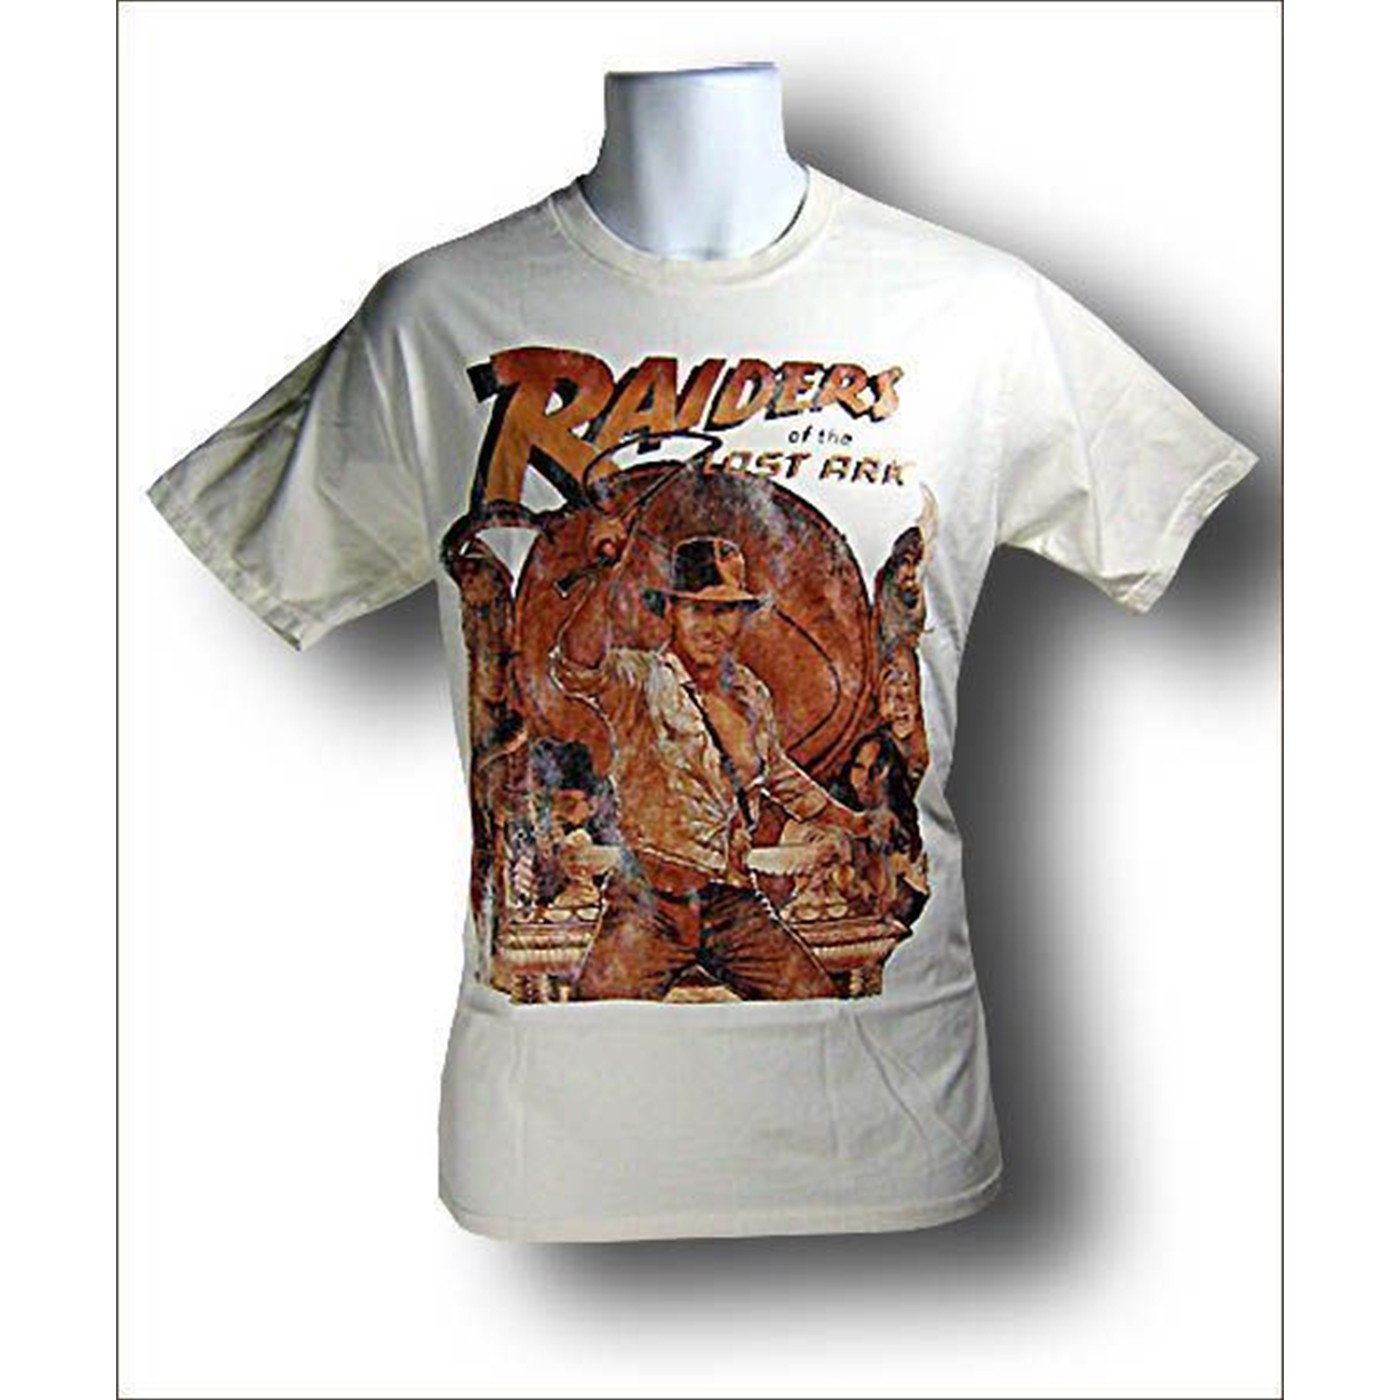 Raiders of the Lost Ark T-Shirt by Junk Food